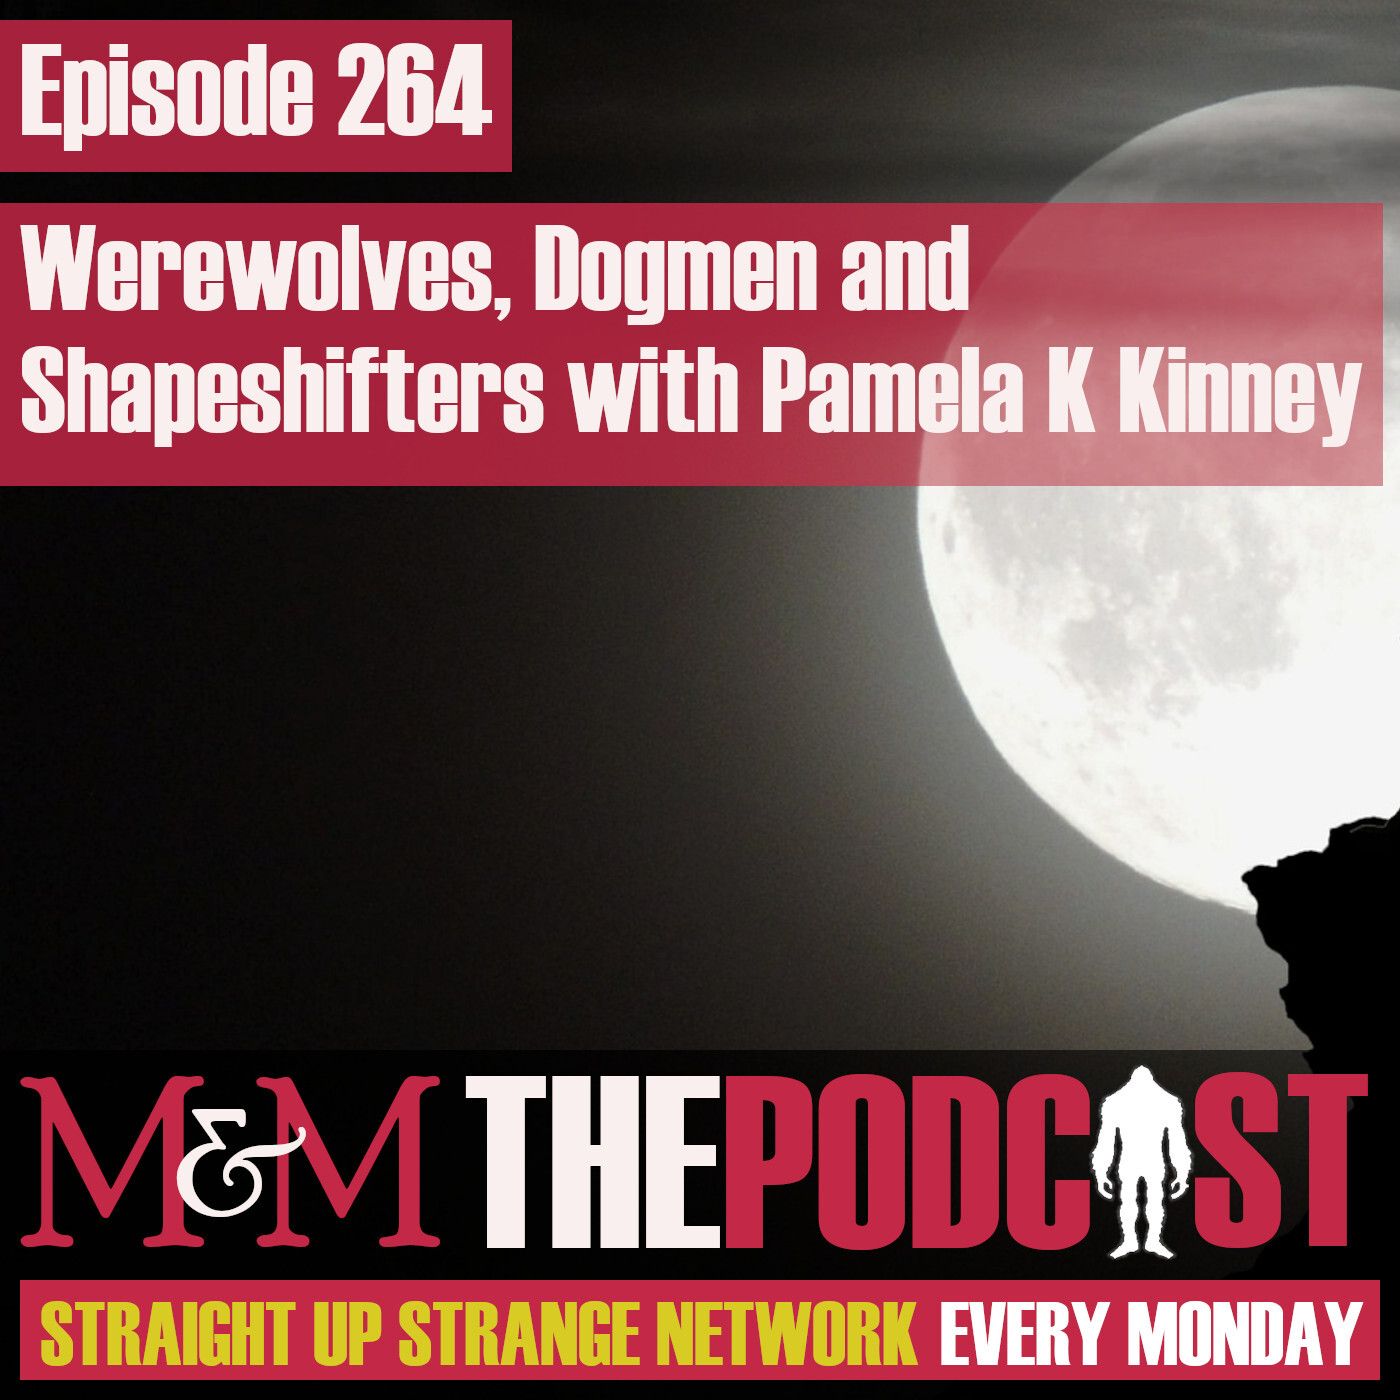 Mysteries and Monsters: Episode 264 Werewolves Dogmen and Shapeshifters with Pamela K Kinney